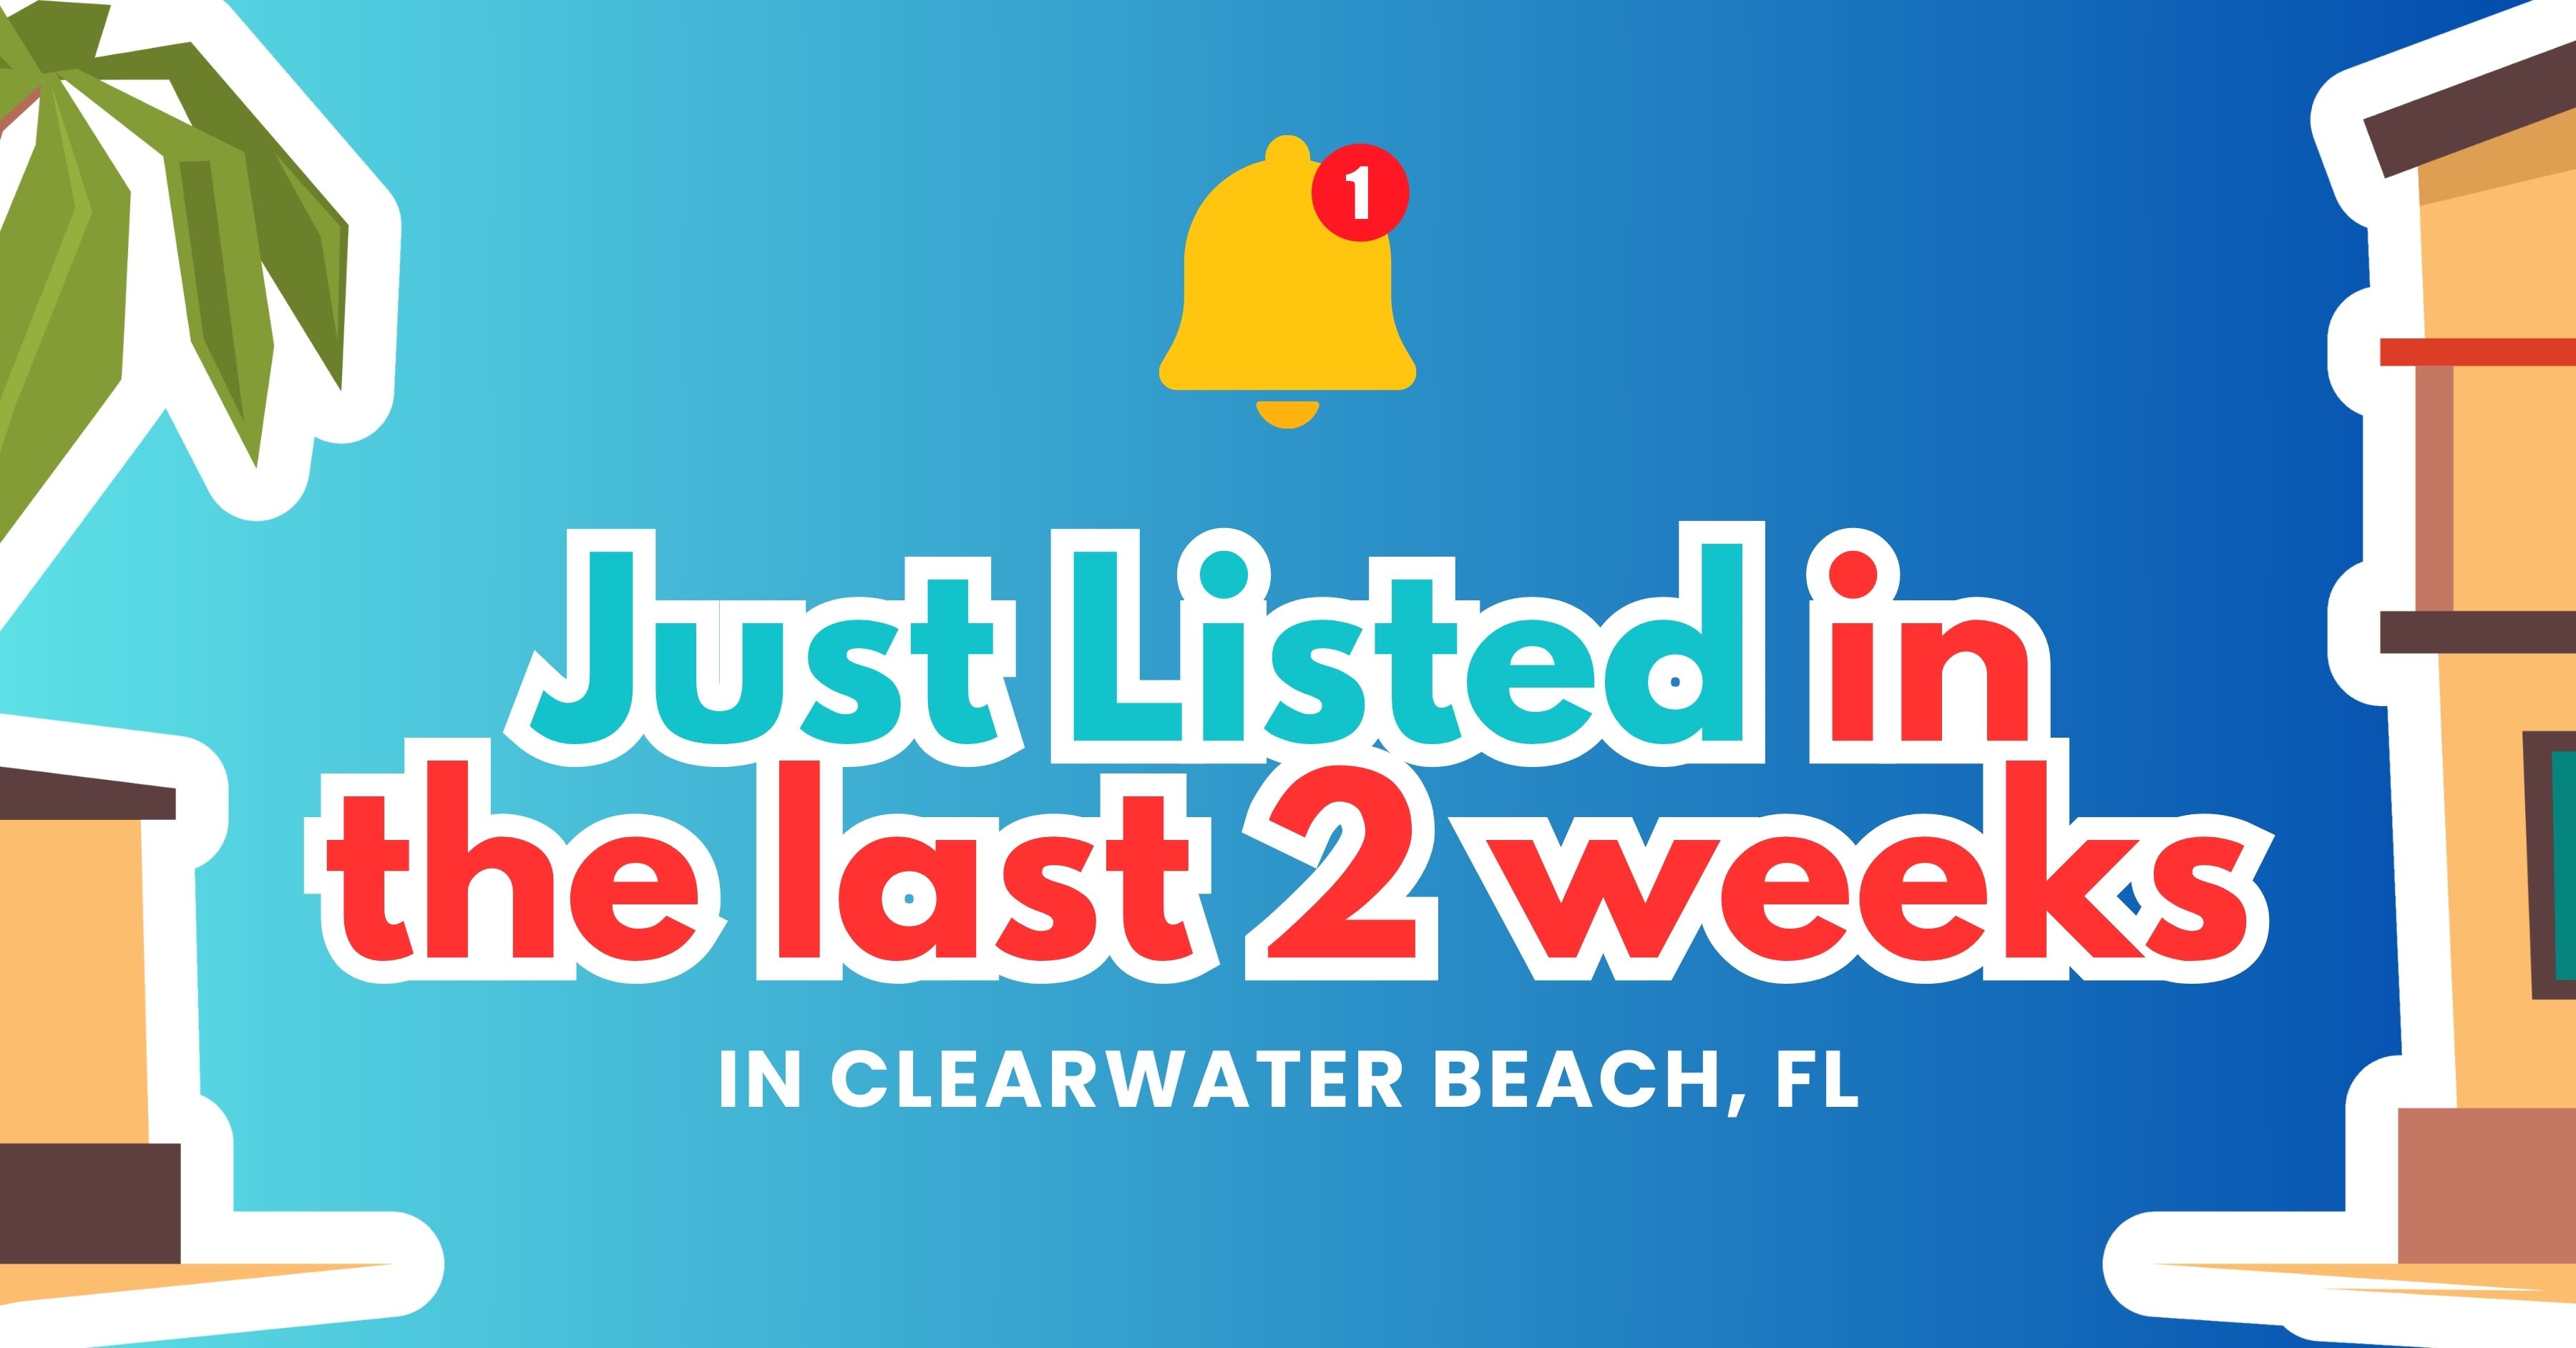 Just Listed in the last 2 weeks in Clearwater Beach, FL